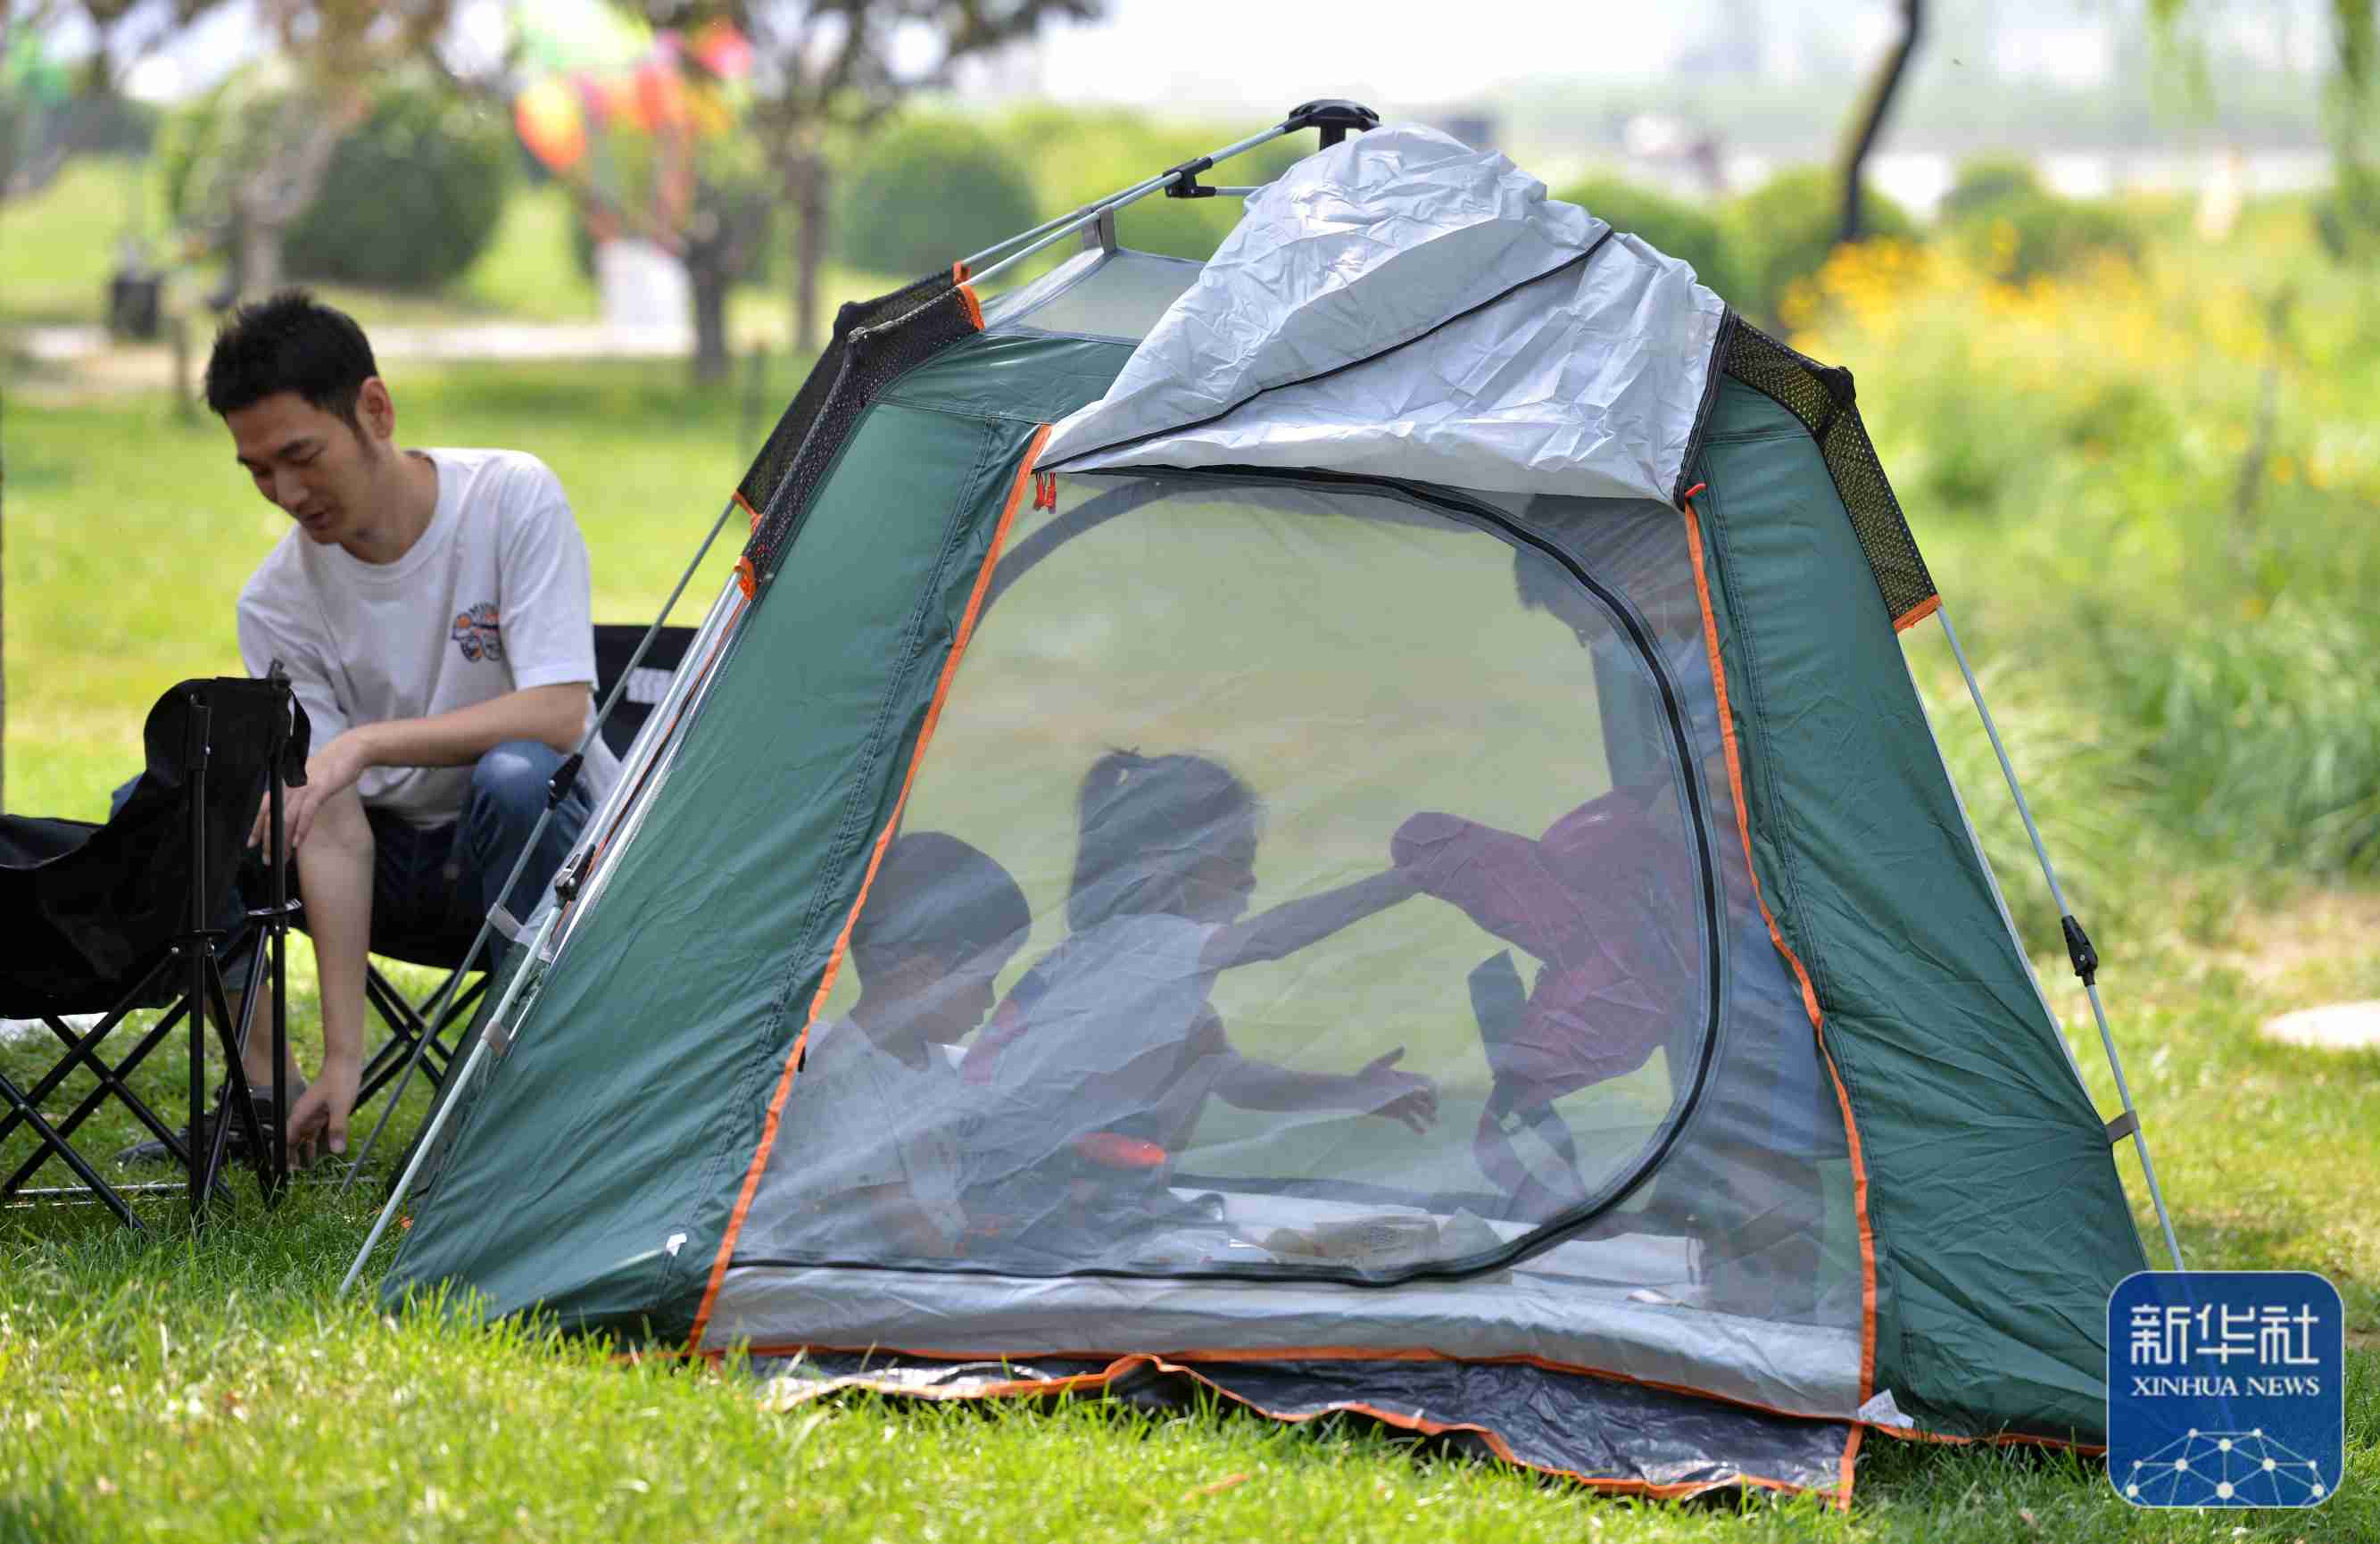 Open urban green spaces, get close to beautiful nature, set up tents | green spaces | nature